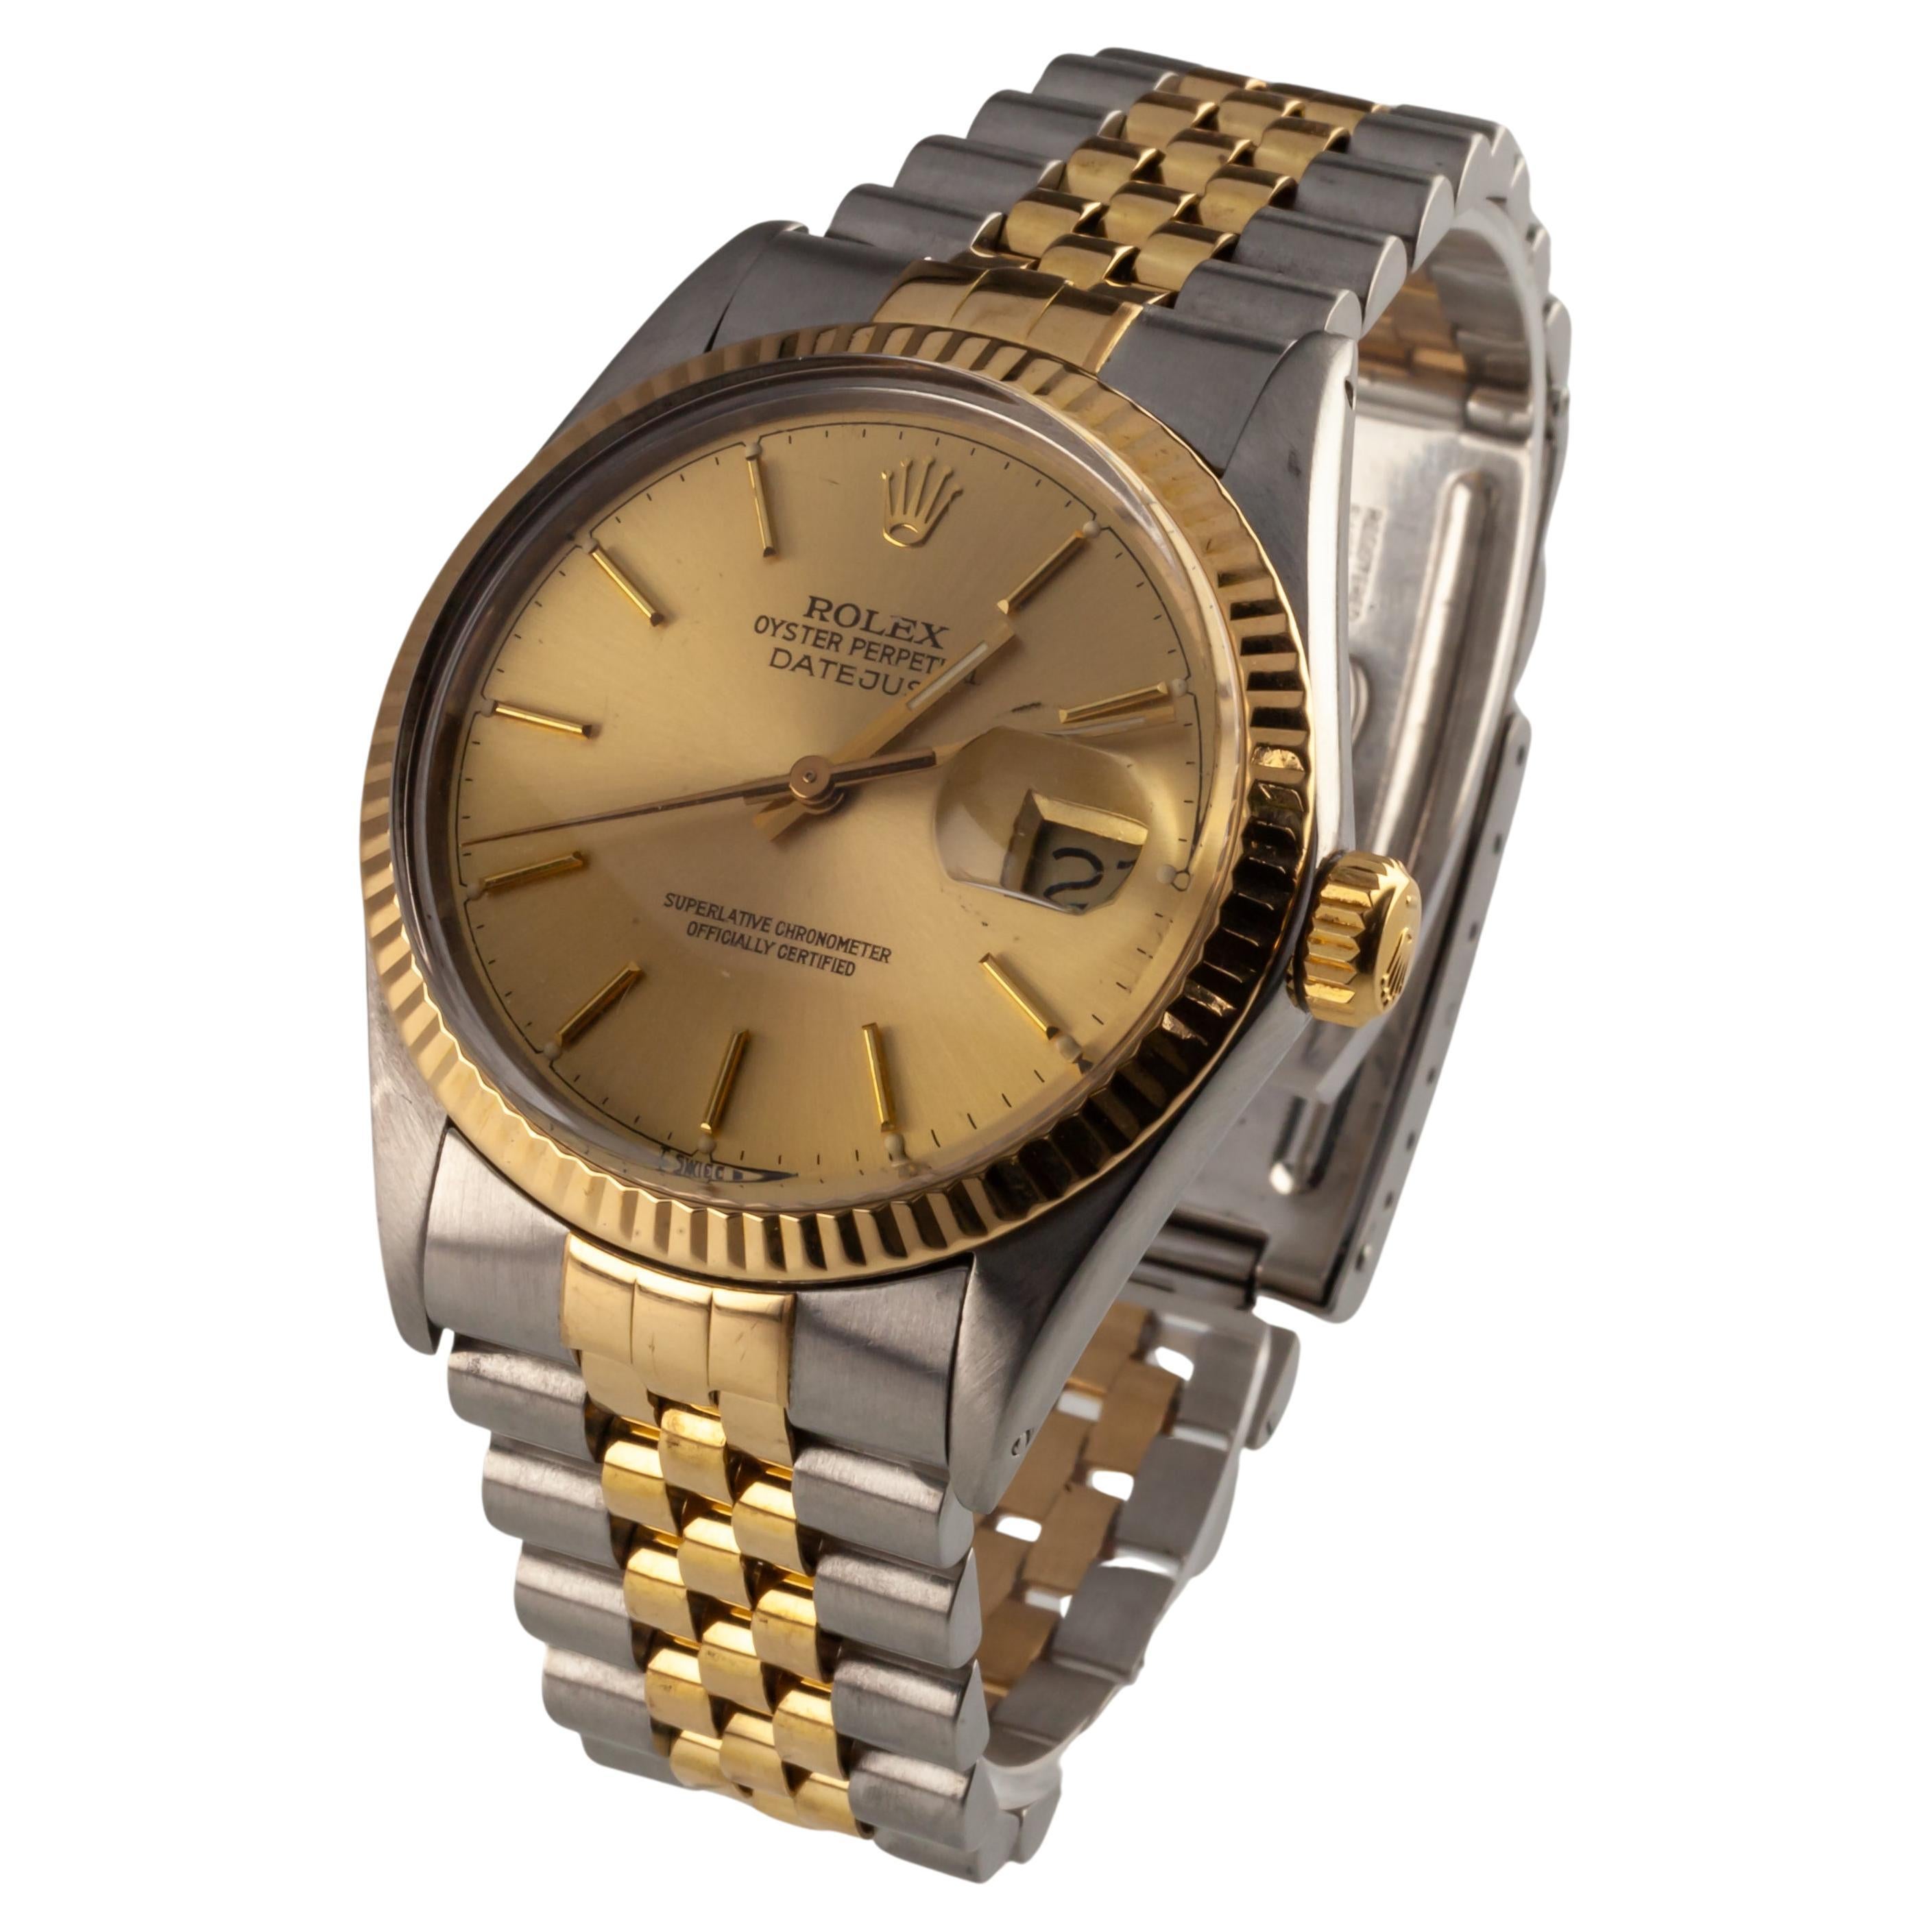 Rolex Men's Two-Tone Jubilee Oyster Perpetual Datejust Watch 16013 1986 For Sale